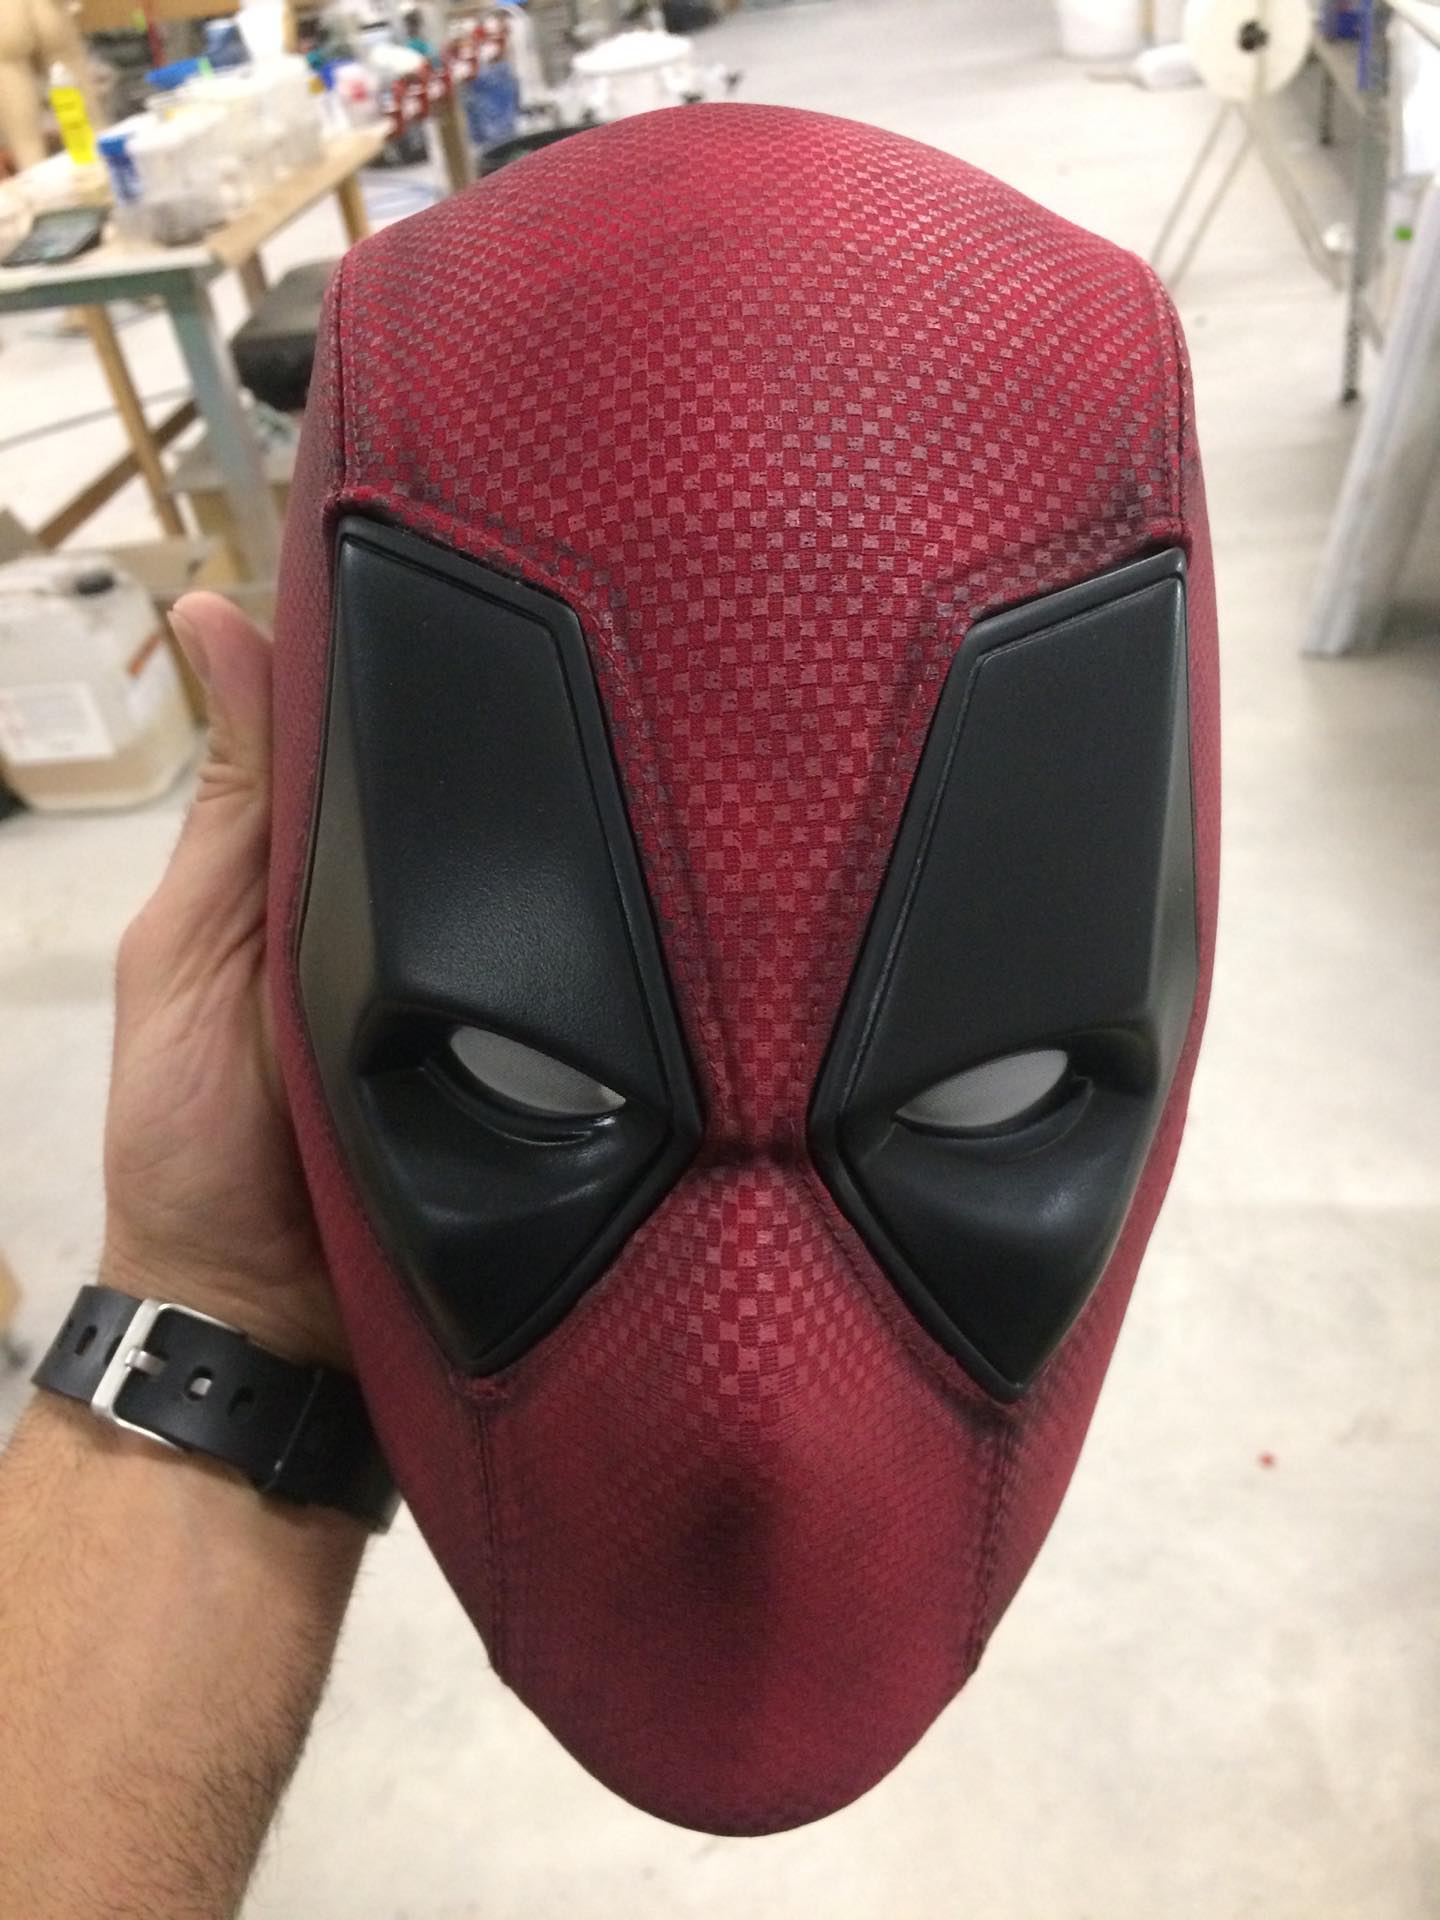 Interest - Deadpool Movie 1 & 2 Costume in Screen Printed Material by Costume  Replica Cave | RPF Costume and Prop Maker Community